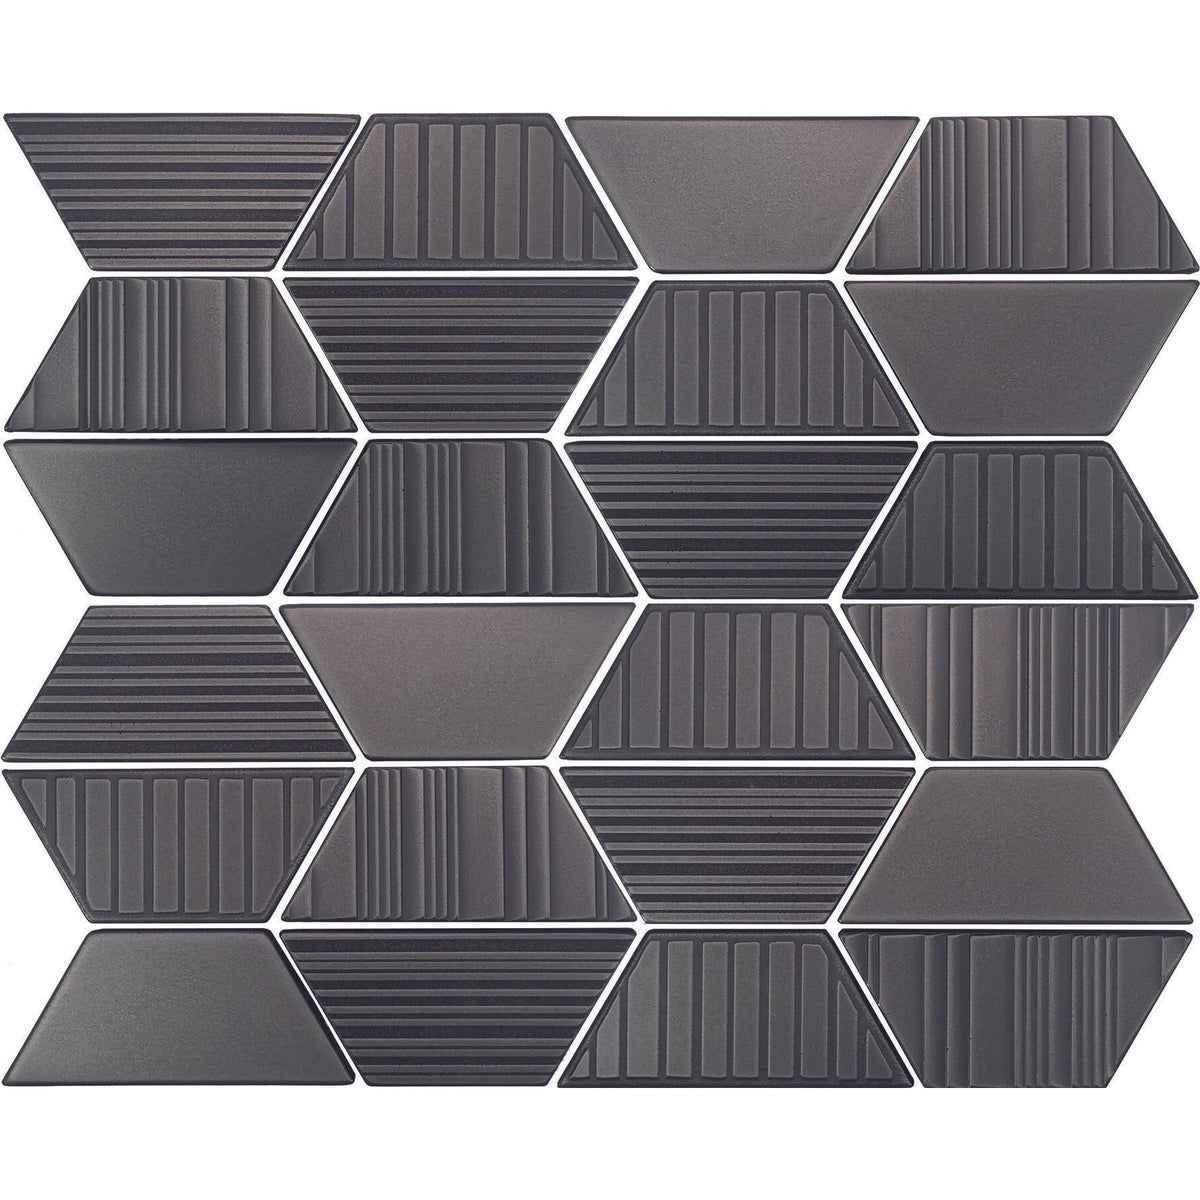 Daltile - Industrial Metals 10 in. x 13 in. - Trapezoid Mosaic - Iron